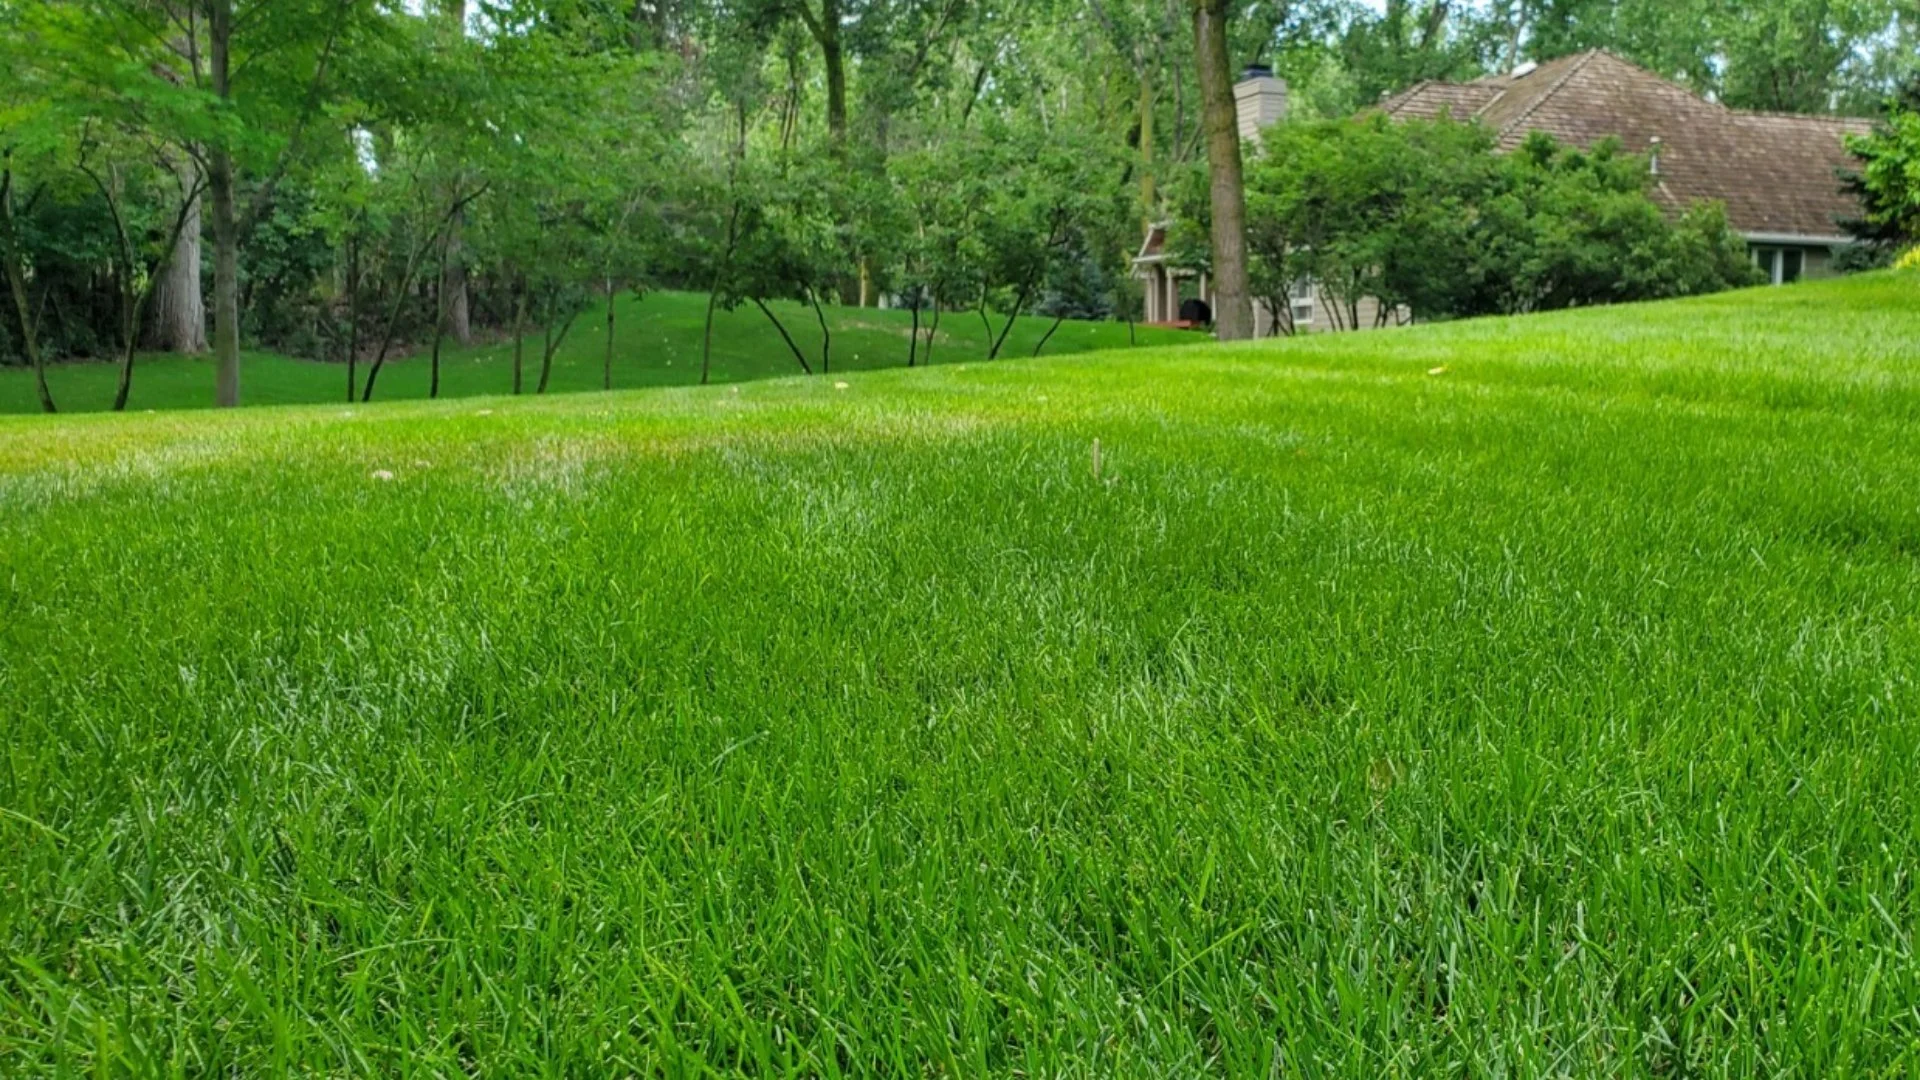 3 Ways to Revive Your Lawn from Winter Dormancy